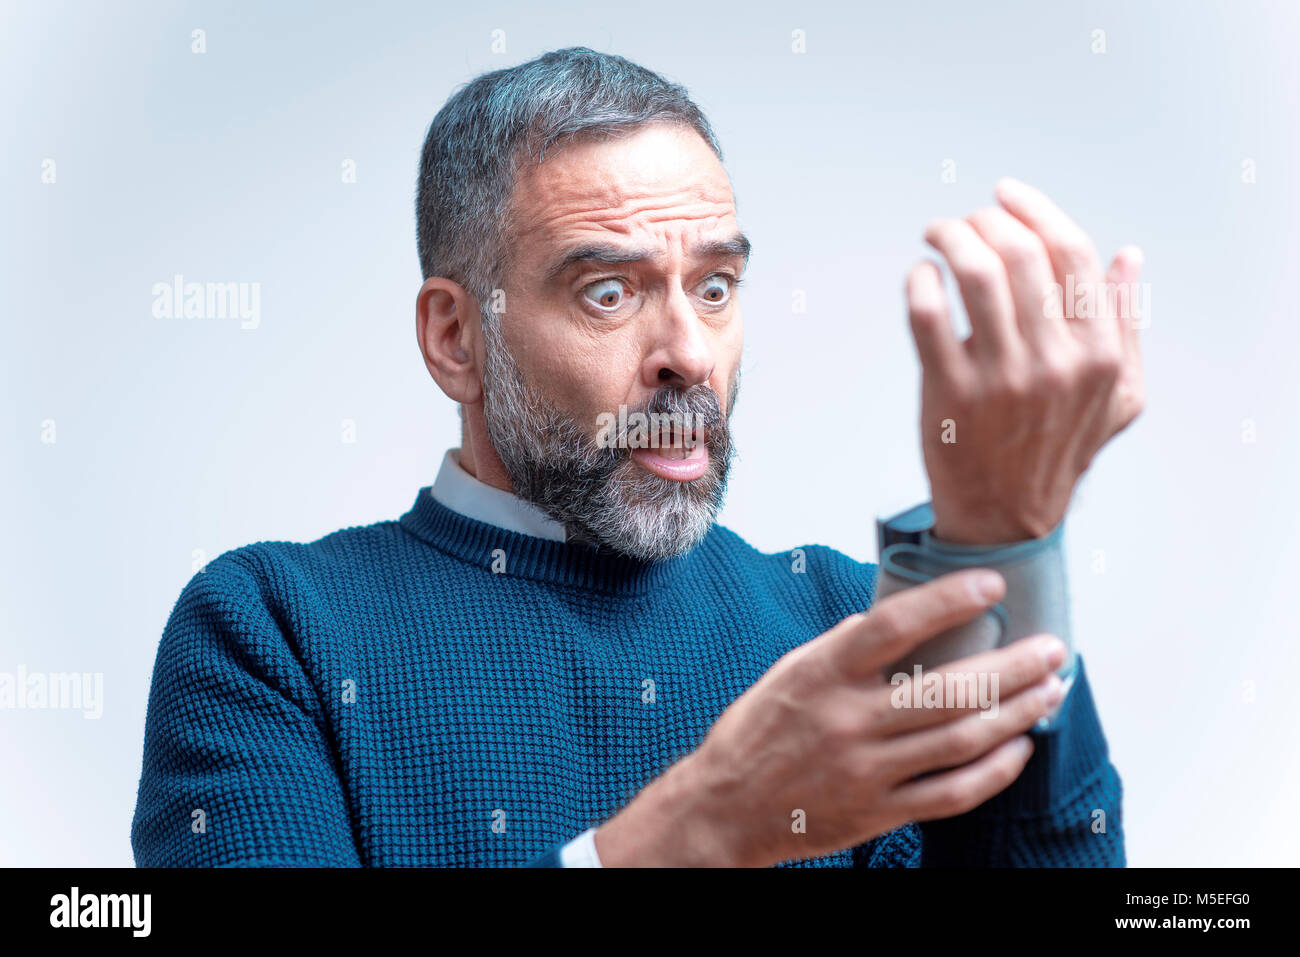 Senior man shocked and outraged with his blood pressure measurement result, studio image Stock Photo